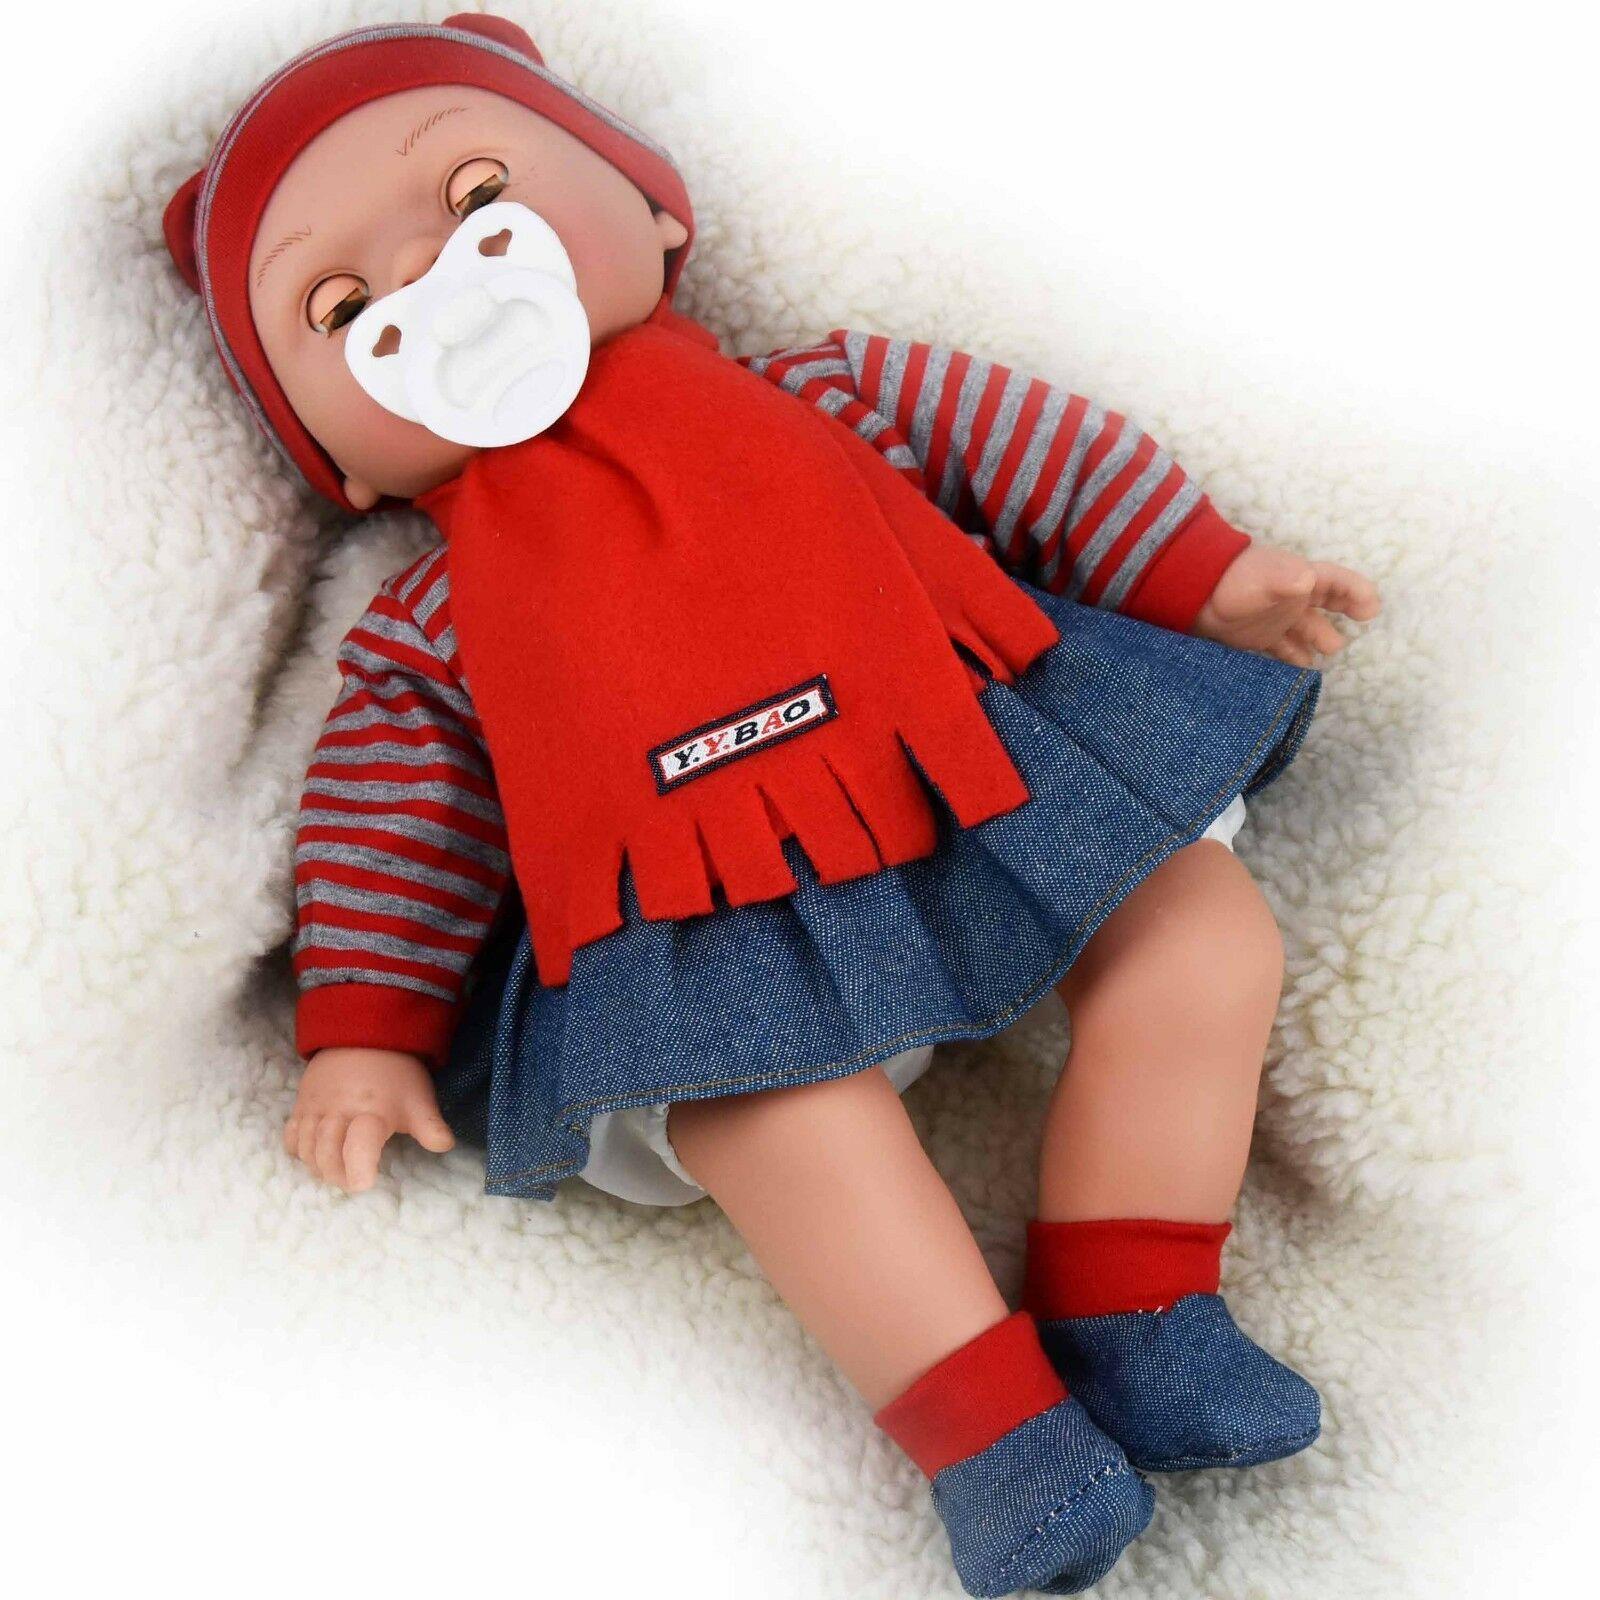 Sleeping Girl Dolls with Freckles, Sounds and Dummy by BiBi Doll - UKBuyZone